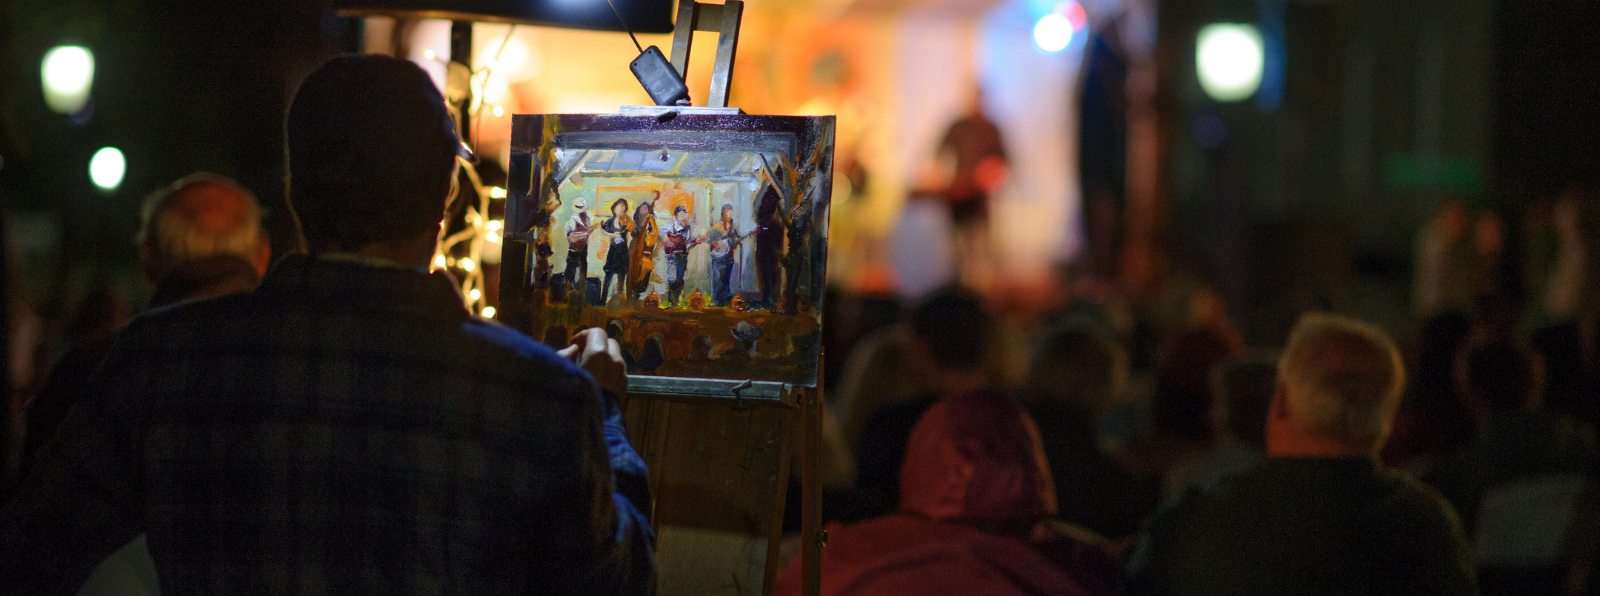 A person at an easel is painting a crowd watching a performance on stage.